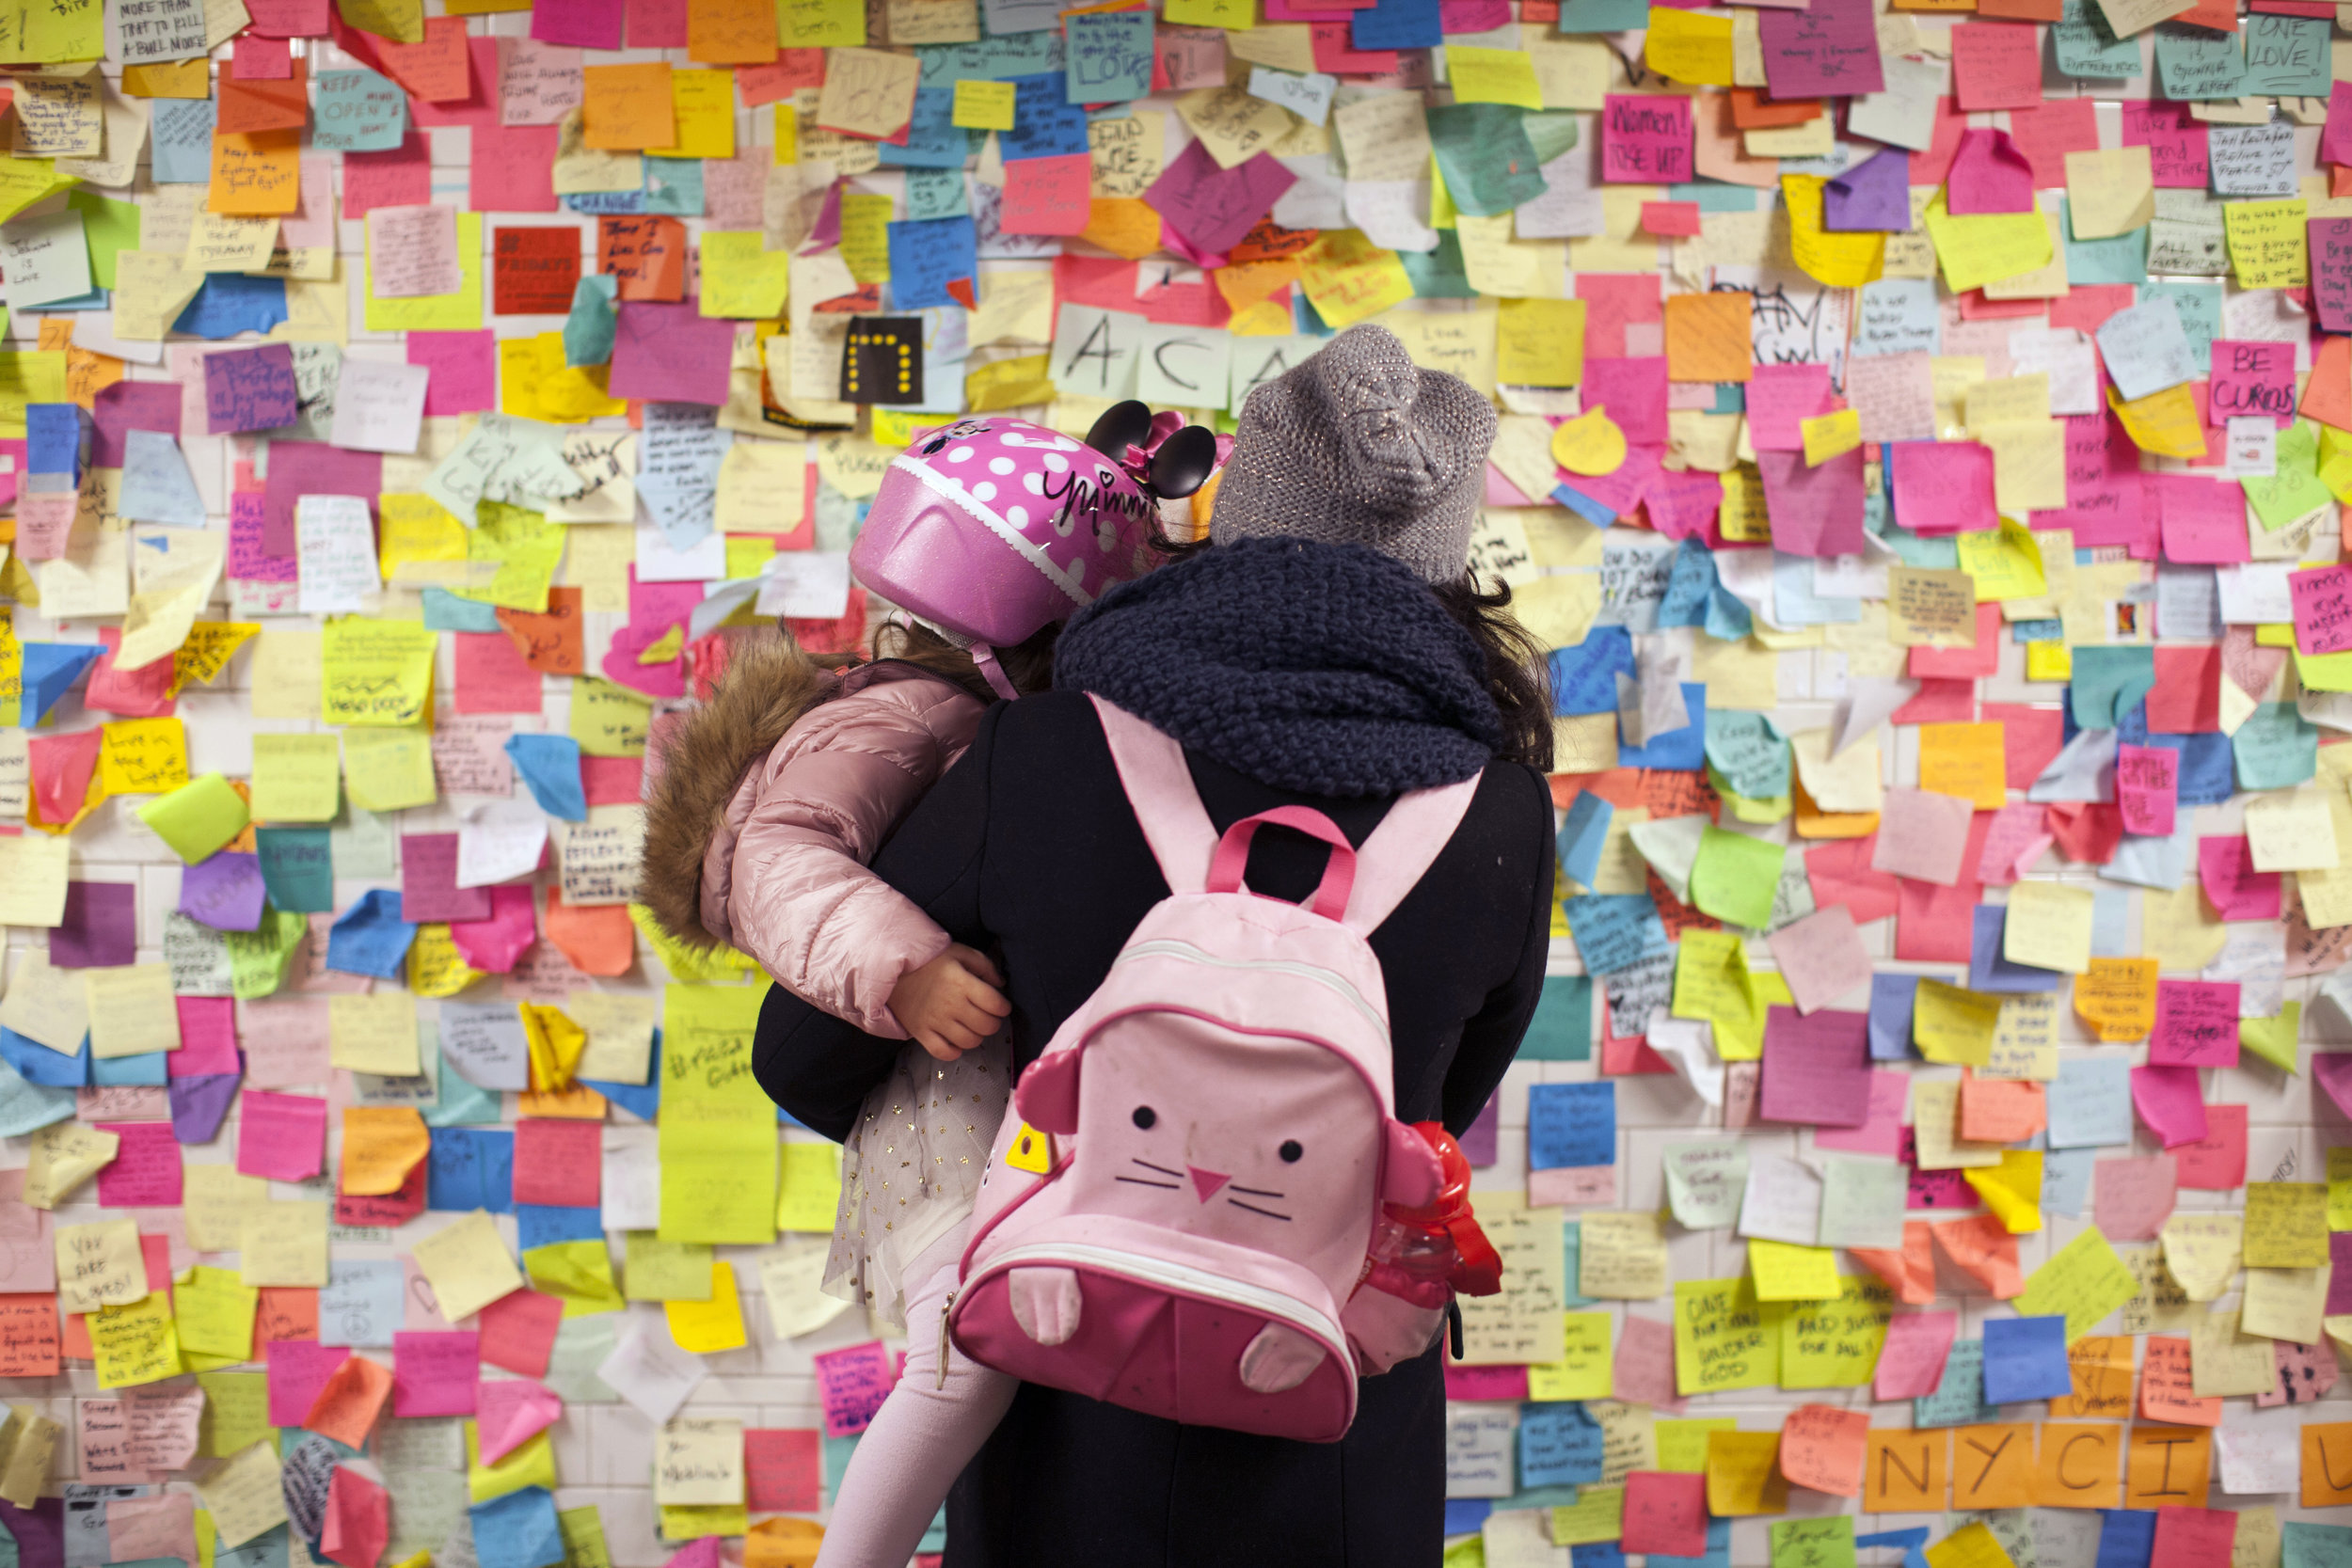 Messages of Love on Post It's  in NYC Subways